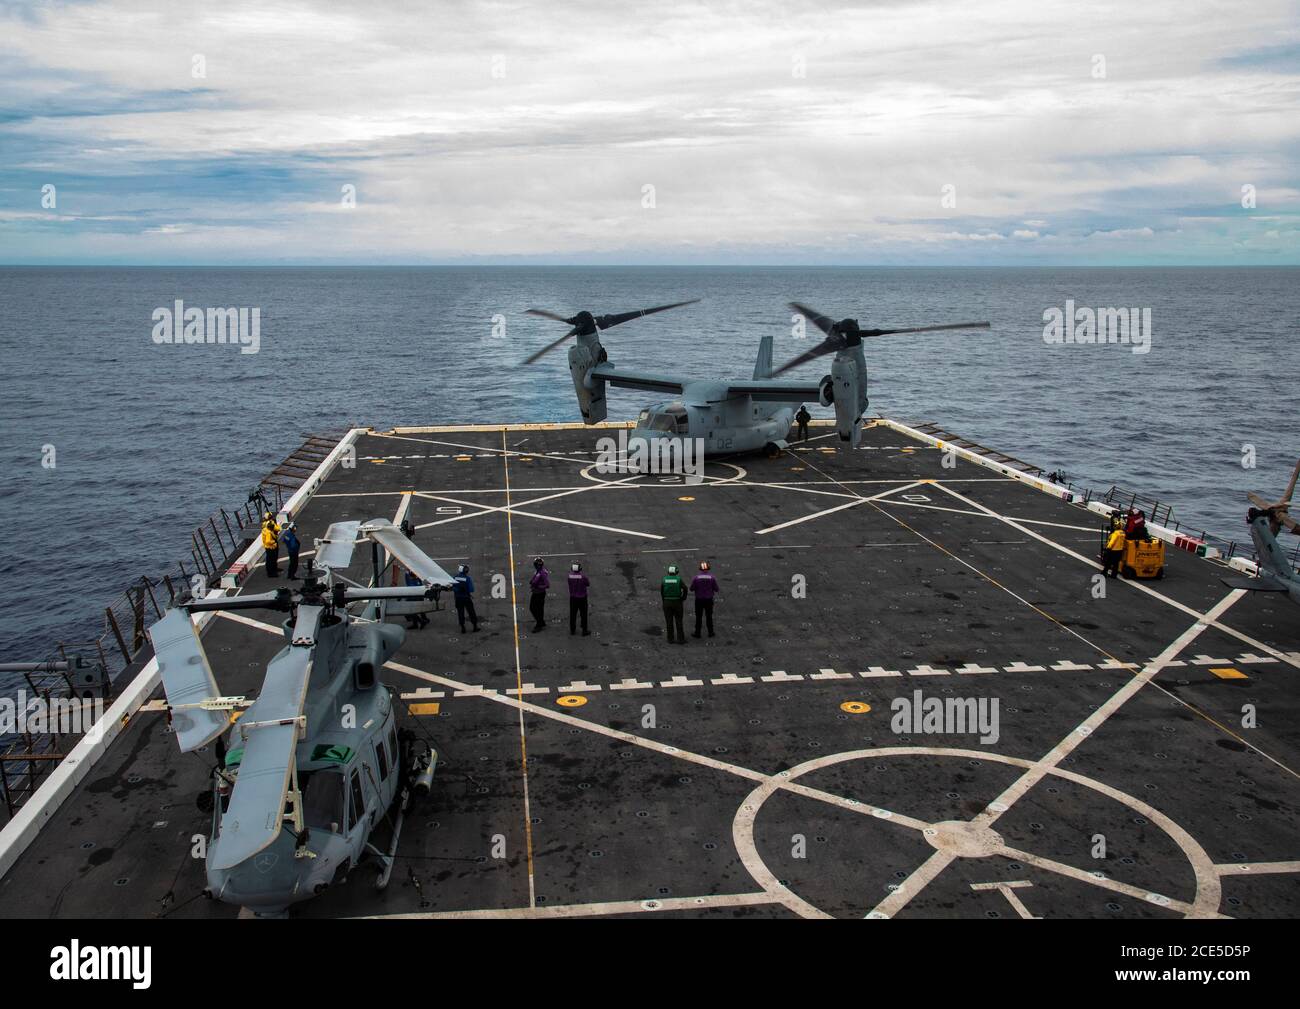 PHILIPPINE SEA (Aug. 22, 2020) Equipment is offloaded from an MV-22B Osprey tiltrotor aircraft with Marine Medium Tiltrotor Squadron 262 (Reinforced), 31st Marine Expeditionary Unit (MEU), aboard USS New Orleans (LPD 18). New Orleans, part of the America Amphibious Ready Group (ARG), 31st MEU team, is operating in the U.S. 7th Fleet area of operation to enhance interoperability with allies and partners and serve as a ready response force to defend peace and stability in the Indo-Pacific region. The America ARG, 31st MEU team remains the premier crisis response force in the region despite the u Stock Photo